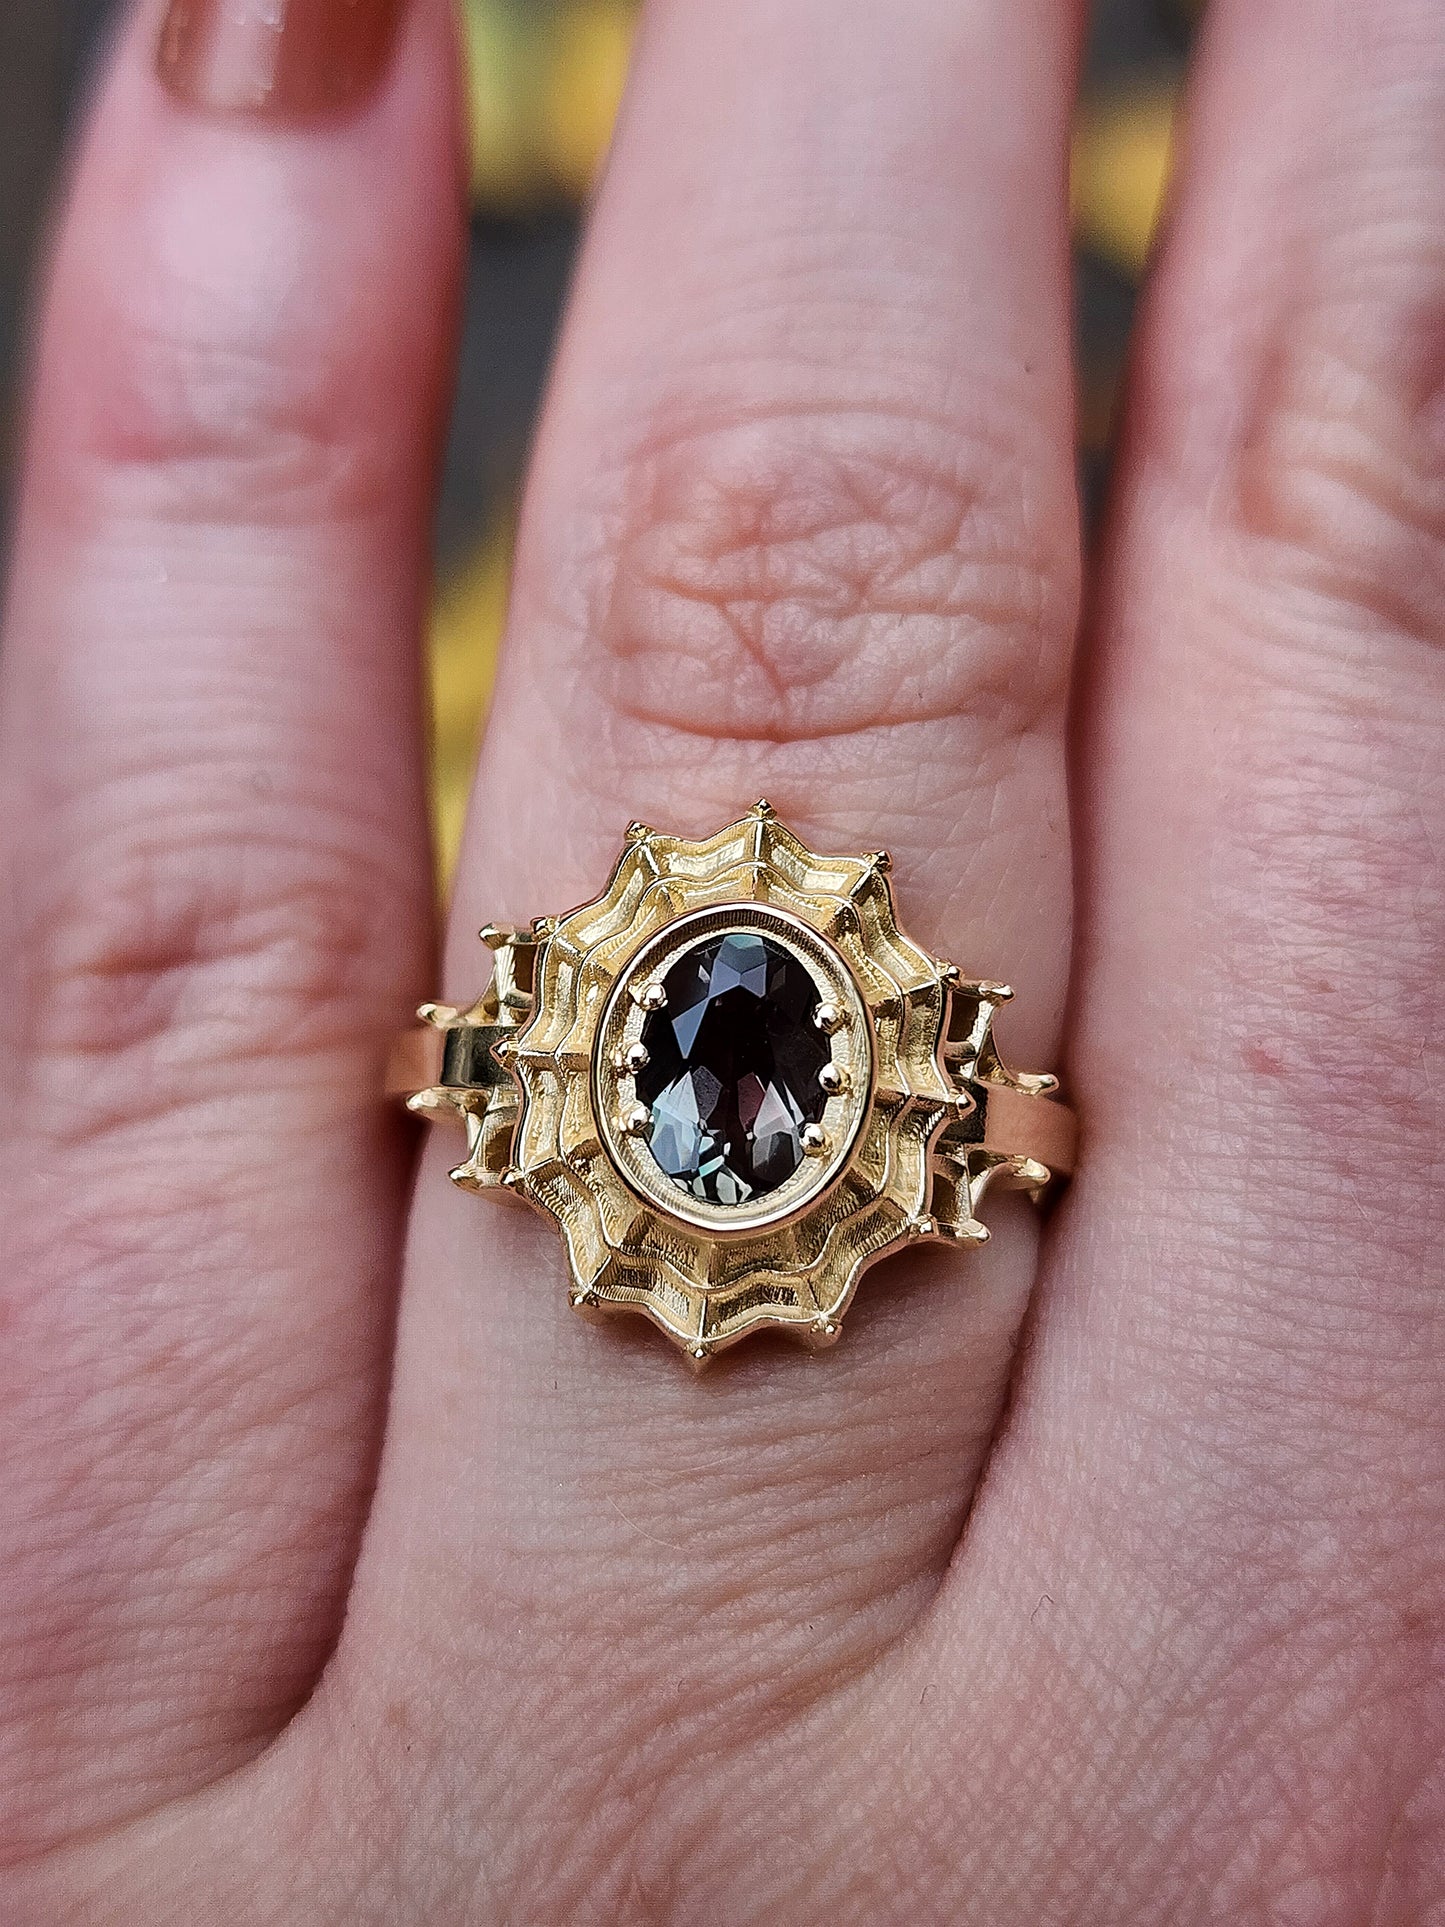 Morticia Spider Web Engagement Ring Gothic 14k Gold Fine Jewelry by SwankMetalsmithing